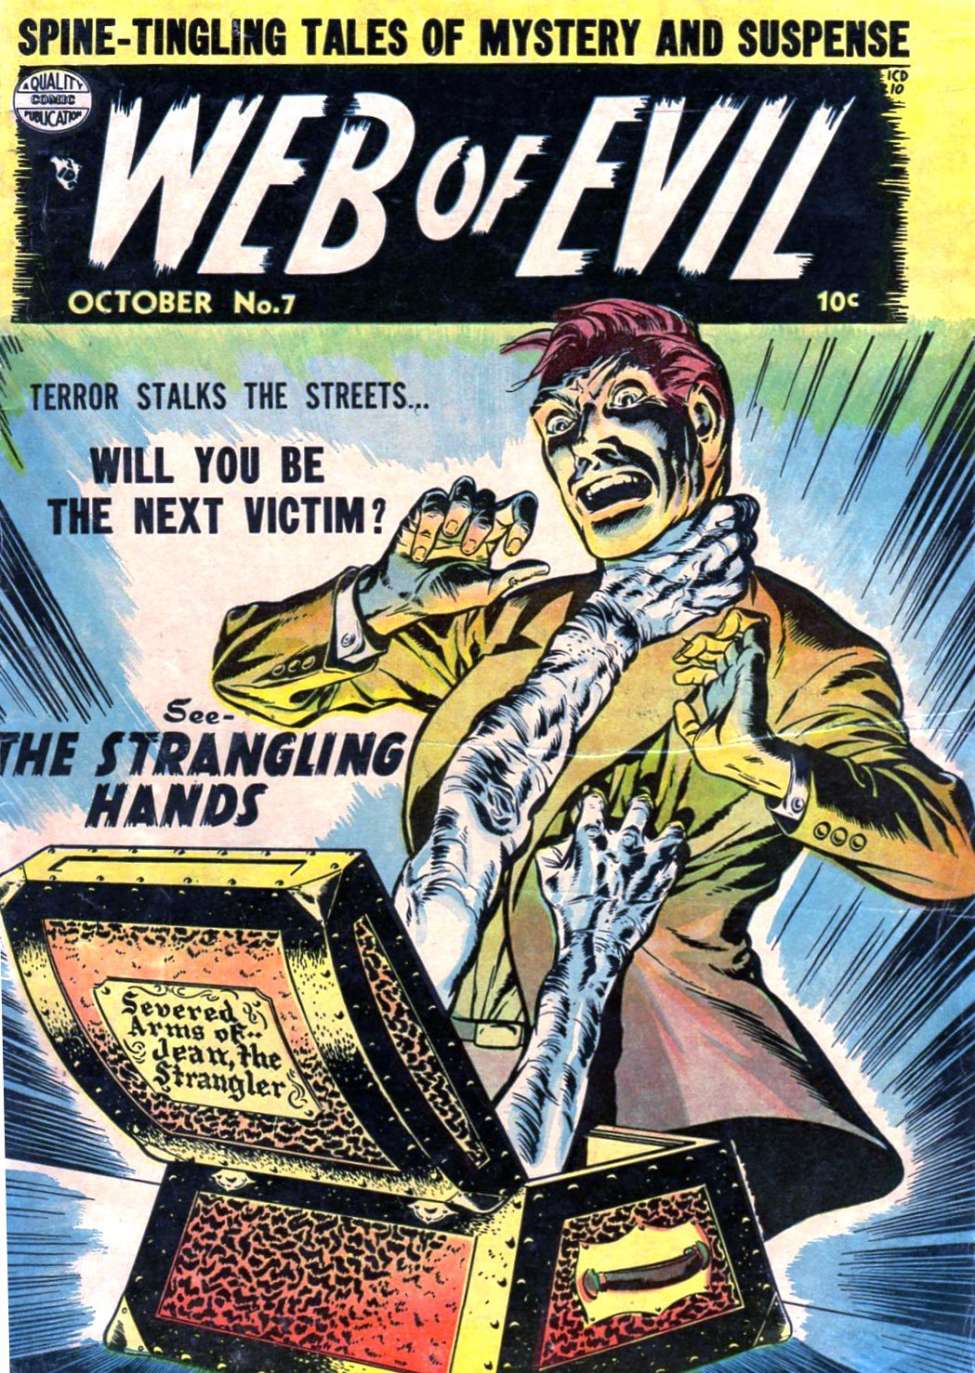 Comic Book Cover For Web of Evil 7